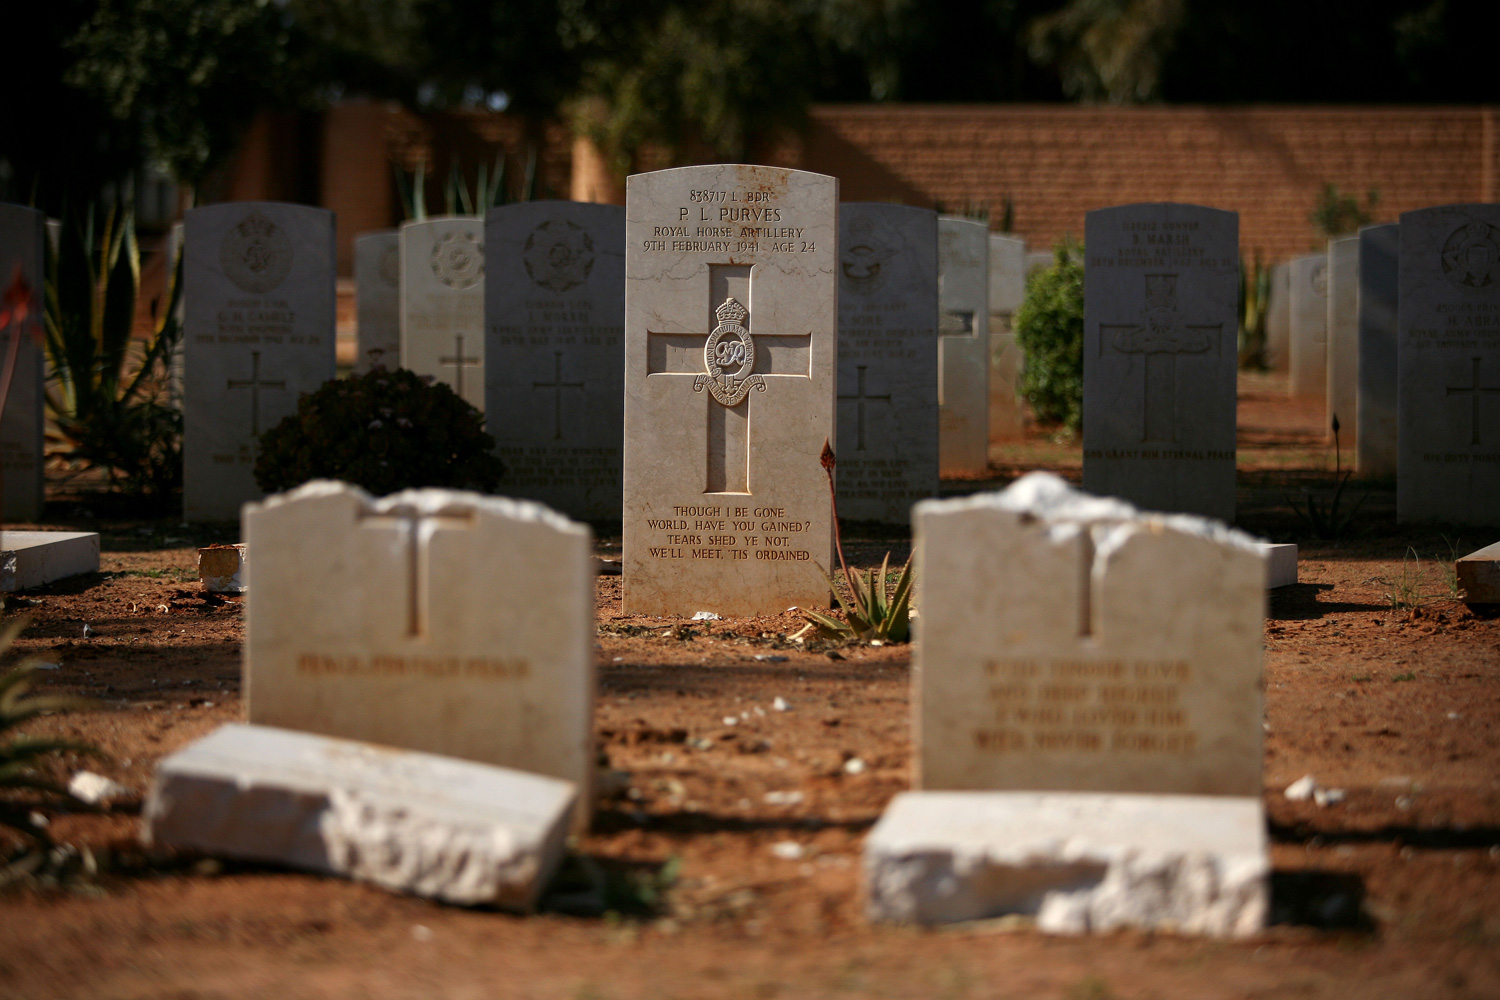 March 6, 2012. Graves of British soldiers of the Royal Horse Artillery are seen at the Commonwealth Benghazi War Cemetery, which holds the remains of British and Commonwealth soldiers who fought during World War II in the north African desert battles, after the cemetery was desecrated by angry Libyans days earlier.